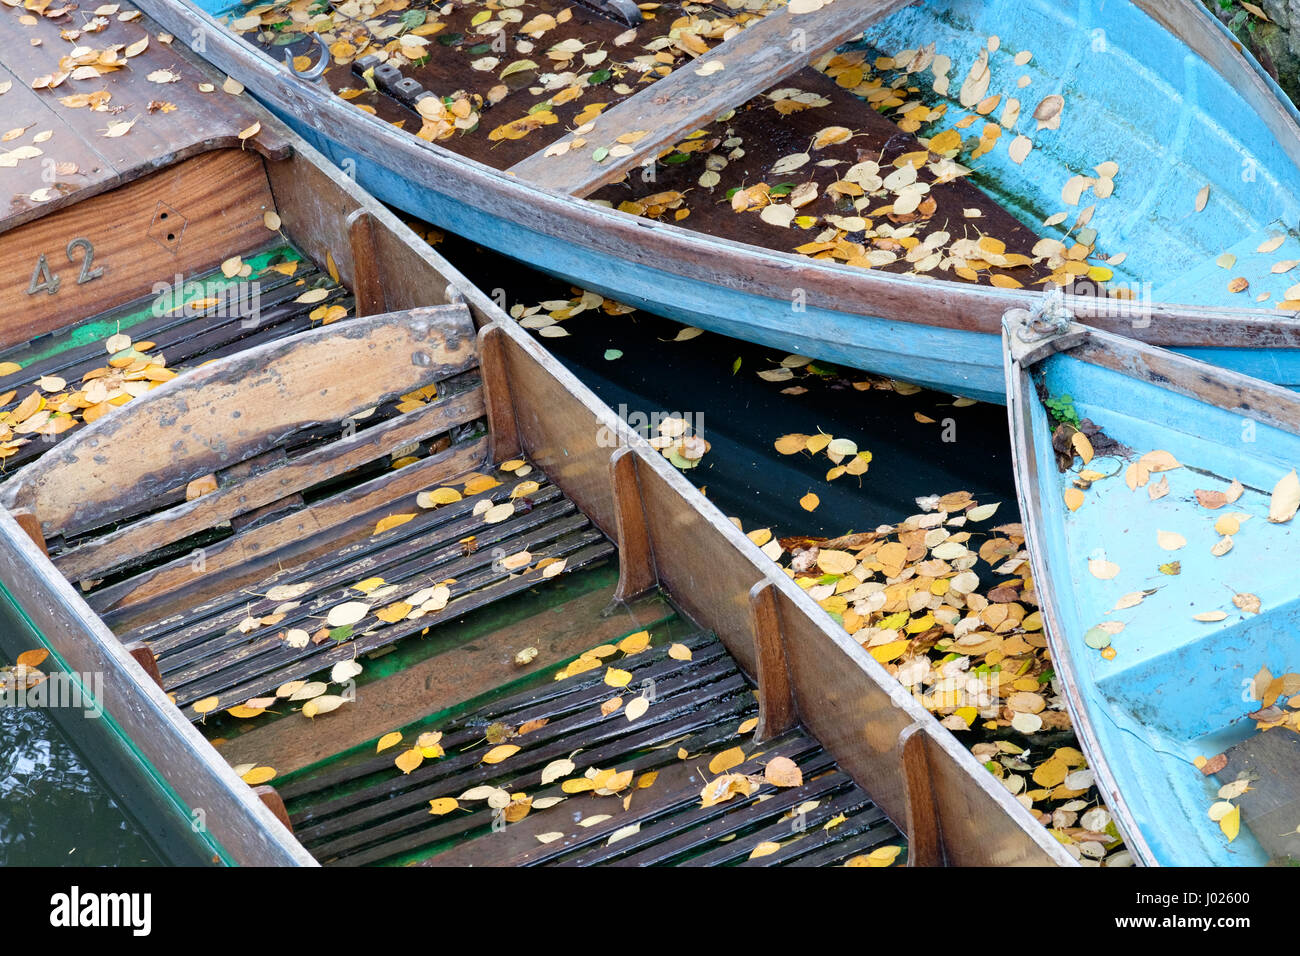 Autumn scene of punts moored on the river Cherwell in Oxford city centre with fallen autumn leaves Stock Photo